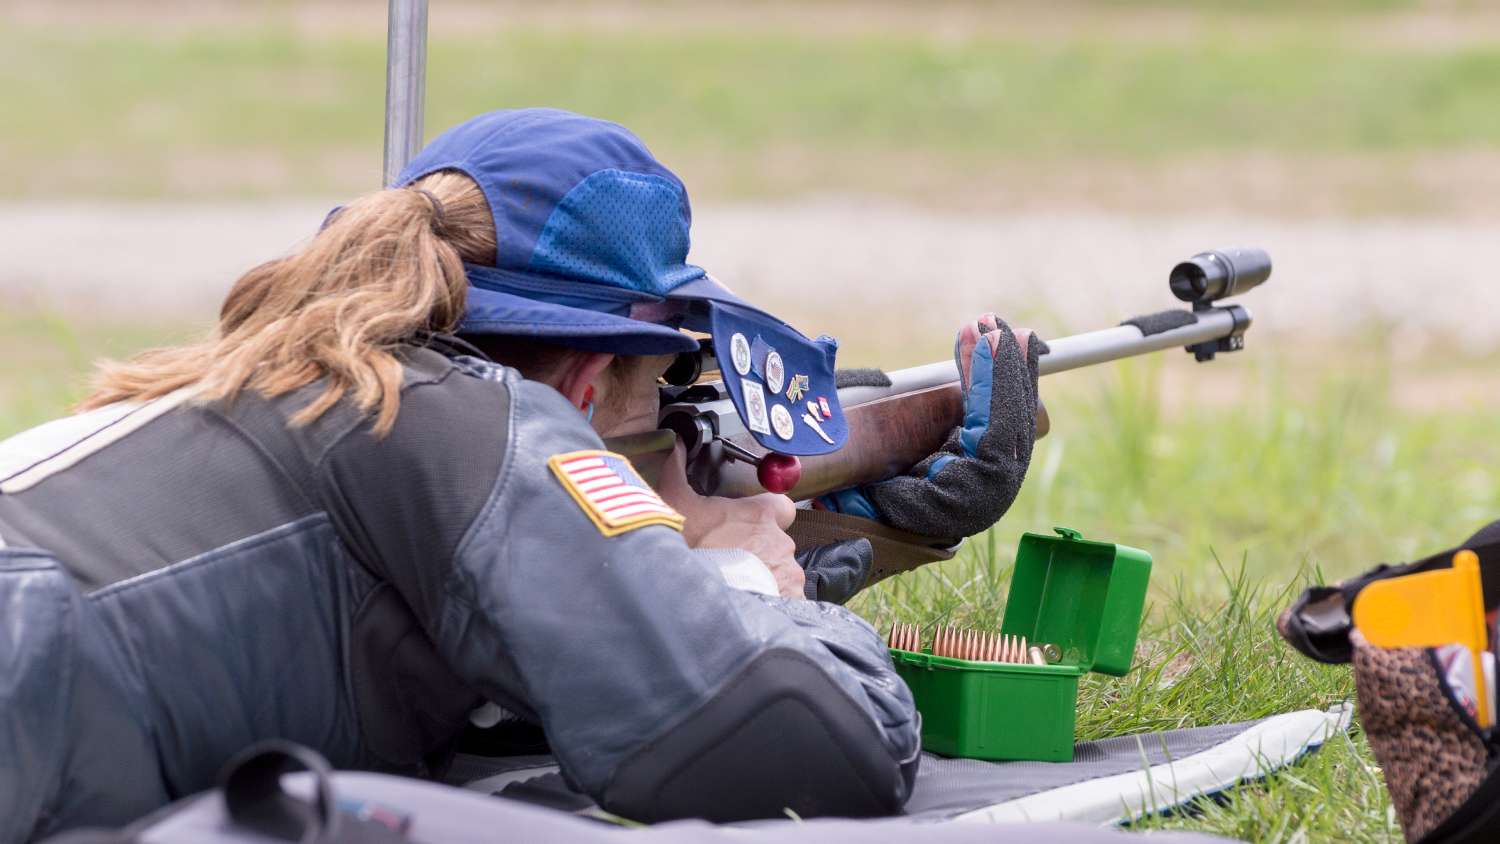 Anette Wachter at the 2017 NRA High Power Rifle National Championships, Camp Atterbury, Indiana